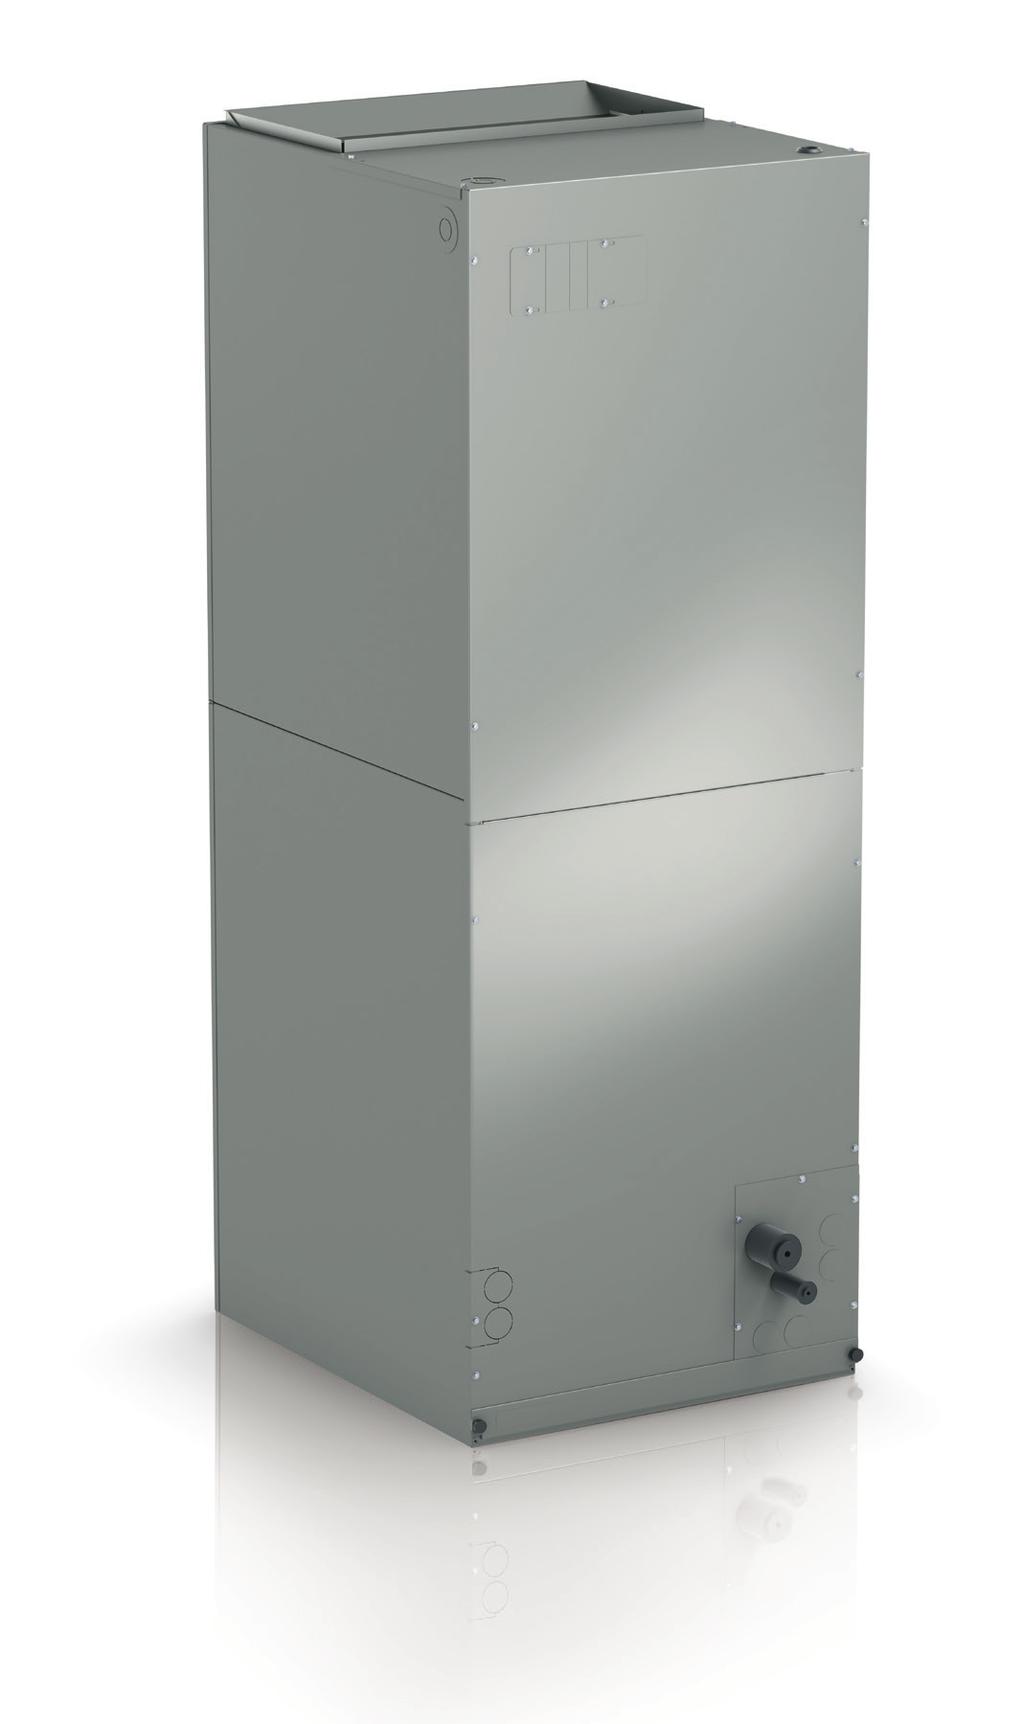 PRODUCT SPECIFICATIONS ENHANCED AIR HANDLER WITH VARIABLE SPEED FORM NO.